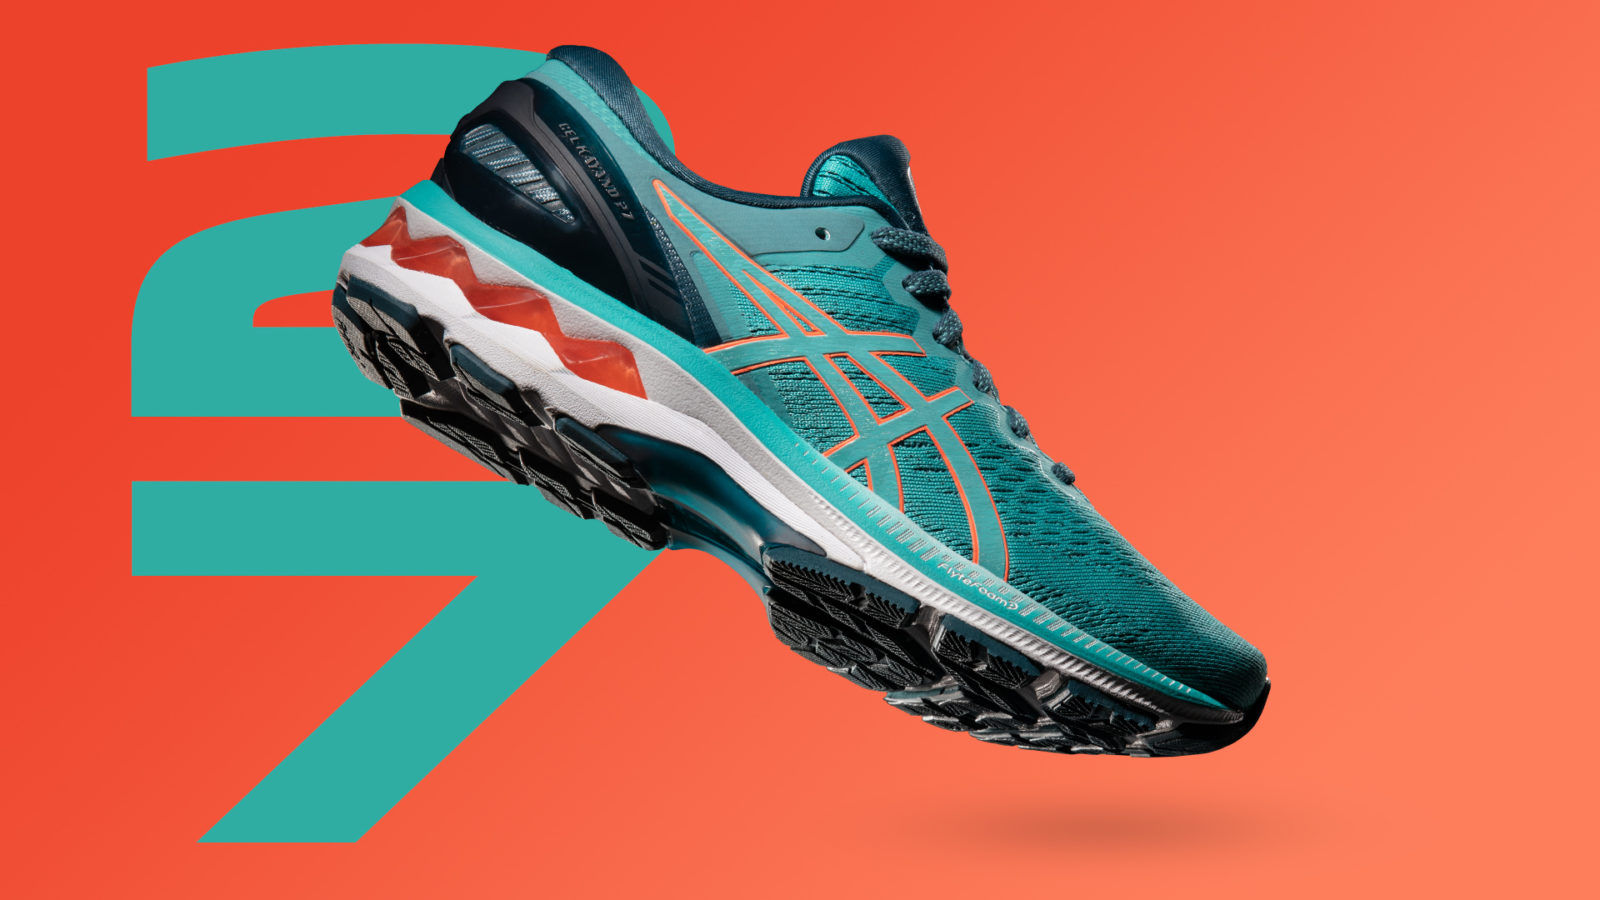 Asics launches GEL-Kayano 27, the latest best performing running shoe